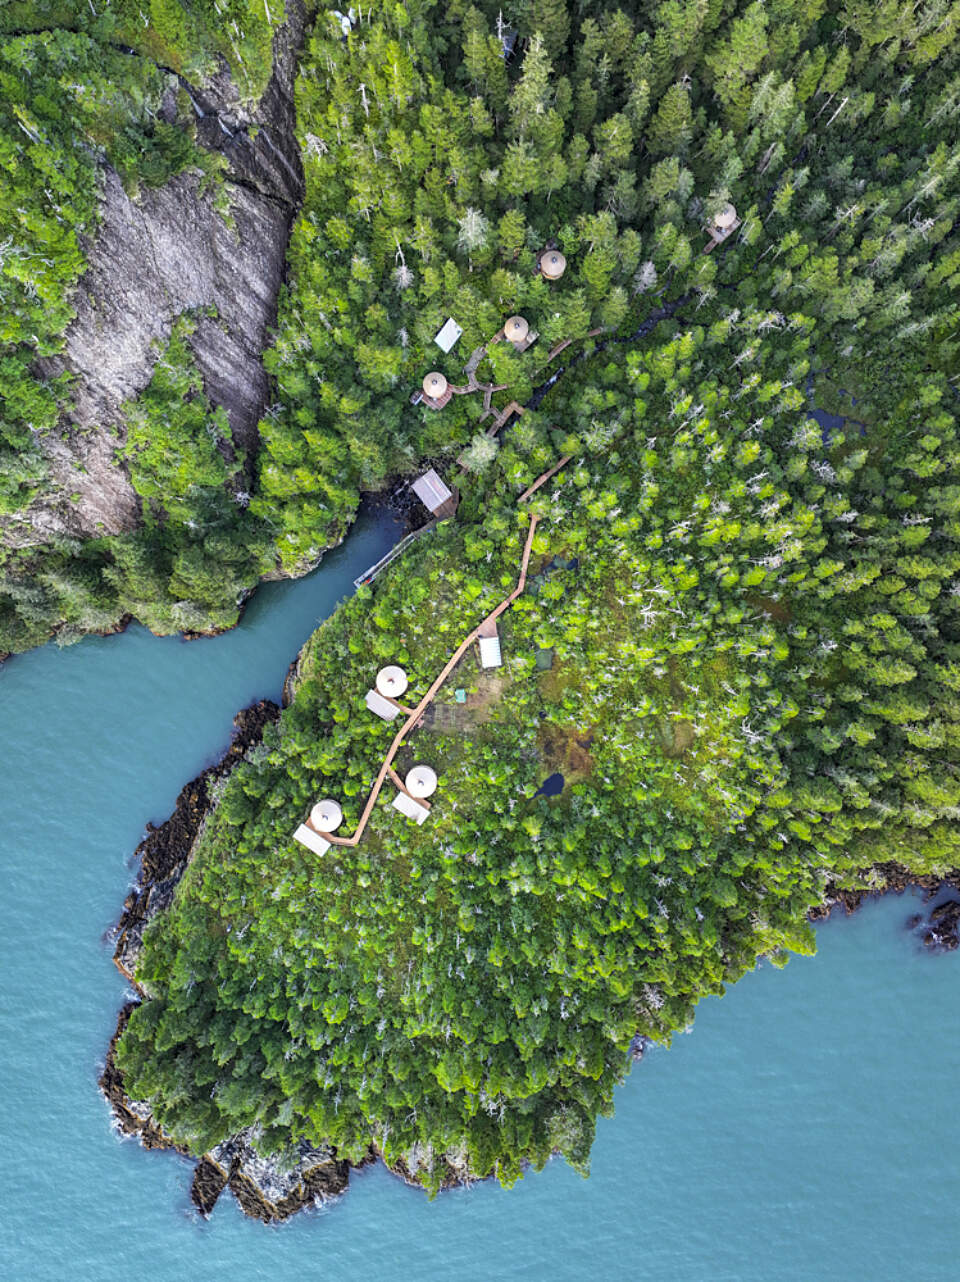 Aerial view of the yurts at Shearwater Cove in Resurrection Bay, Alaska